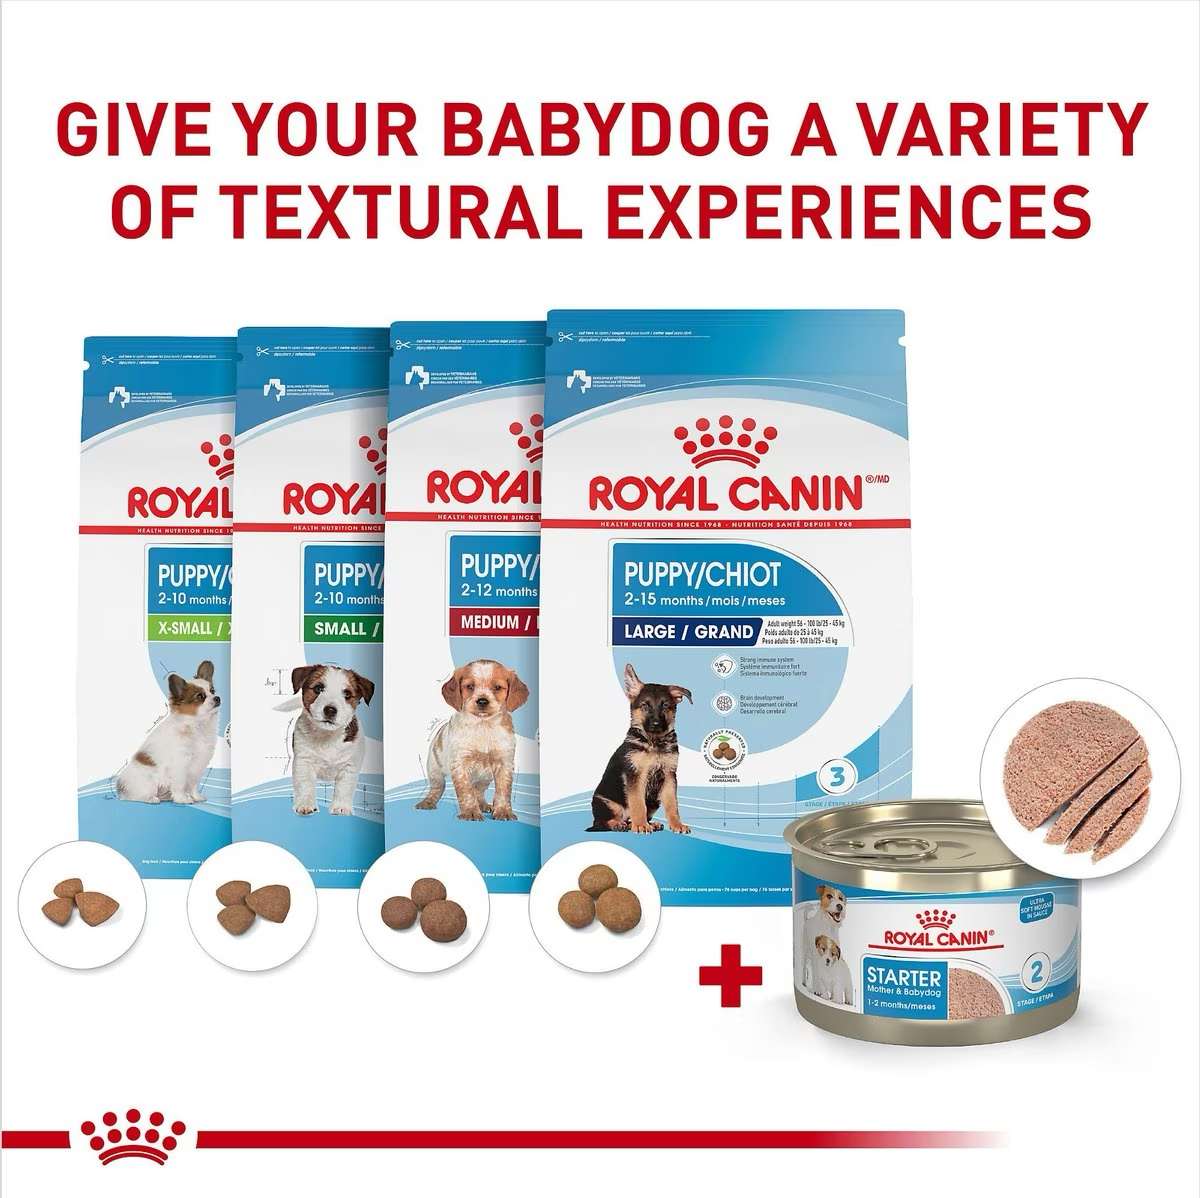 Royal Canin Size Health Nutrition Starter Mother & Babydog Mousse In Sauce Canned Dog Food  Canned Dog Food  | PetMax Canada